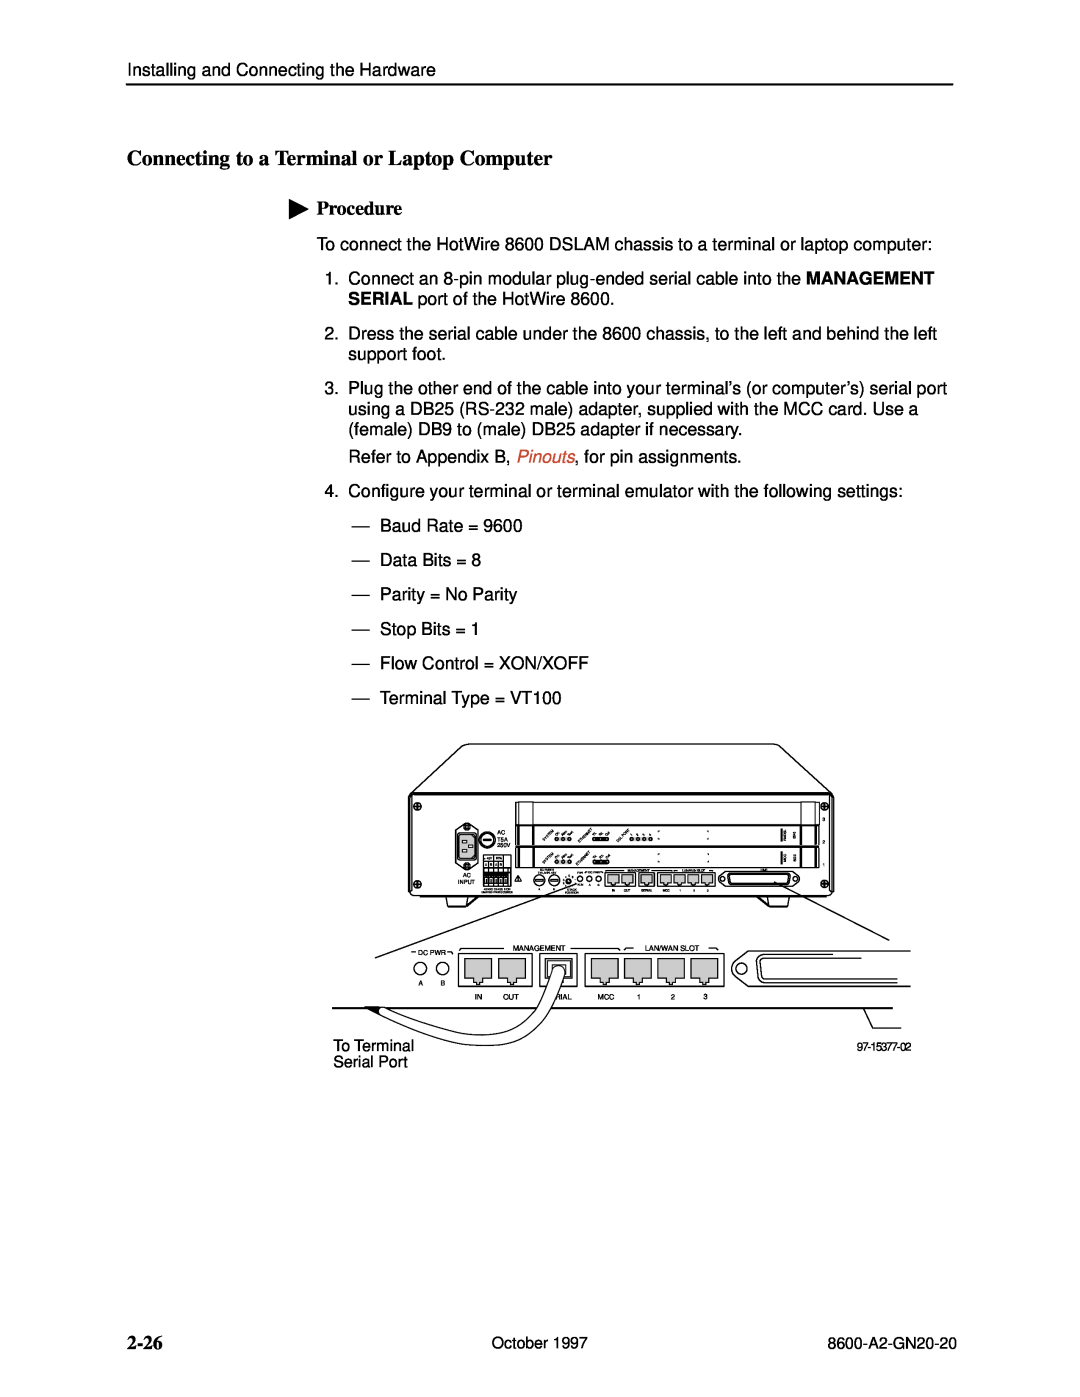 Nortel Networks 8600 manual Connecting to a Terminal or Laptop Computer, 2-26, Procedure, To Terminal, Serial Port 